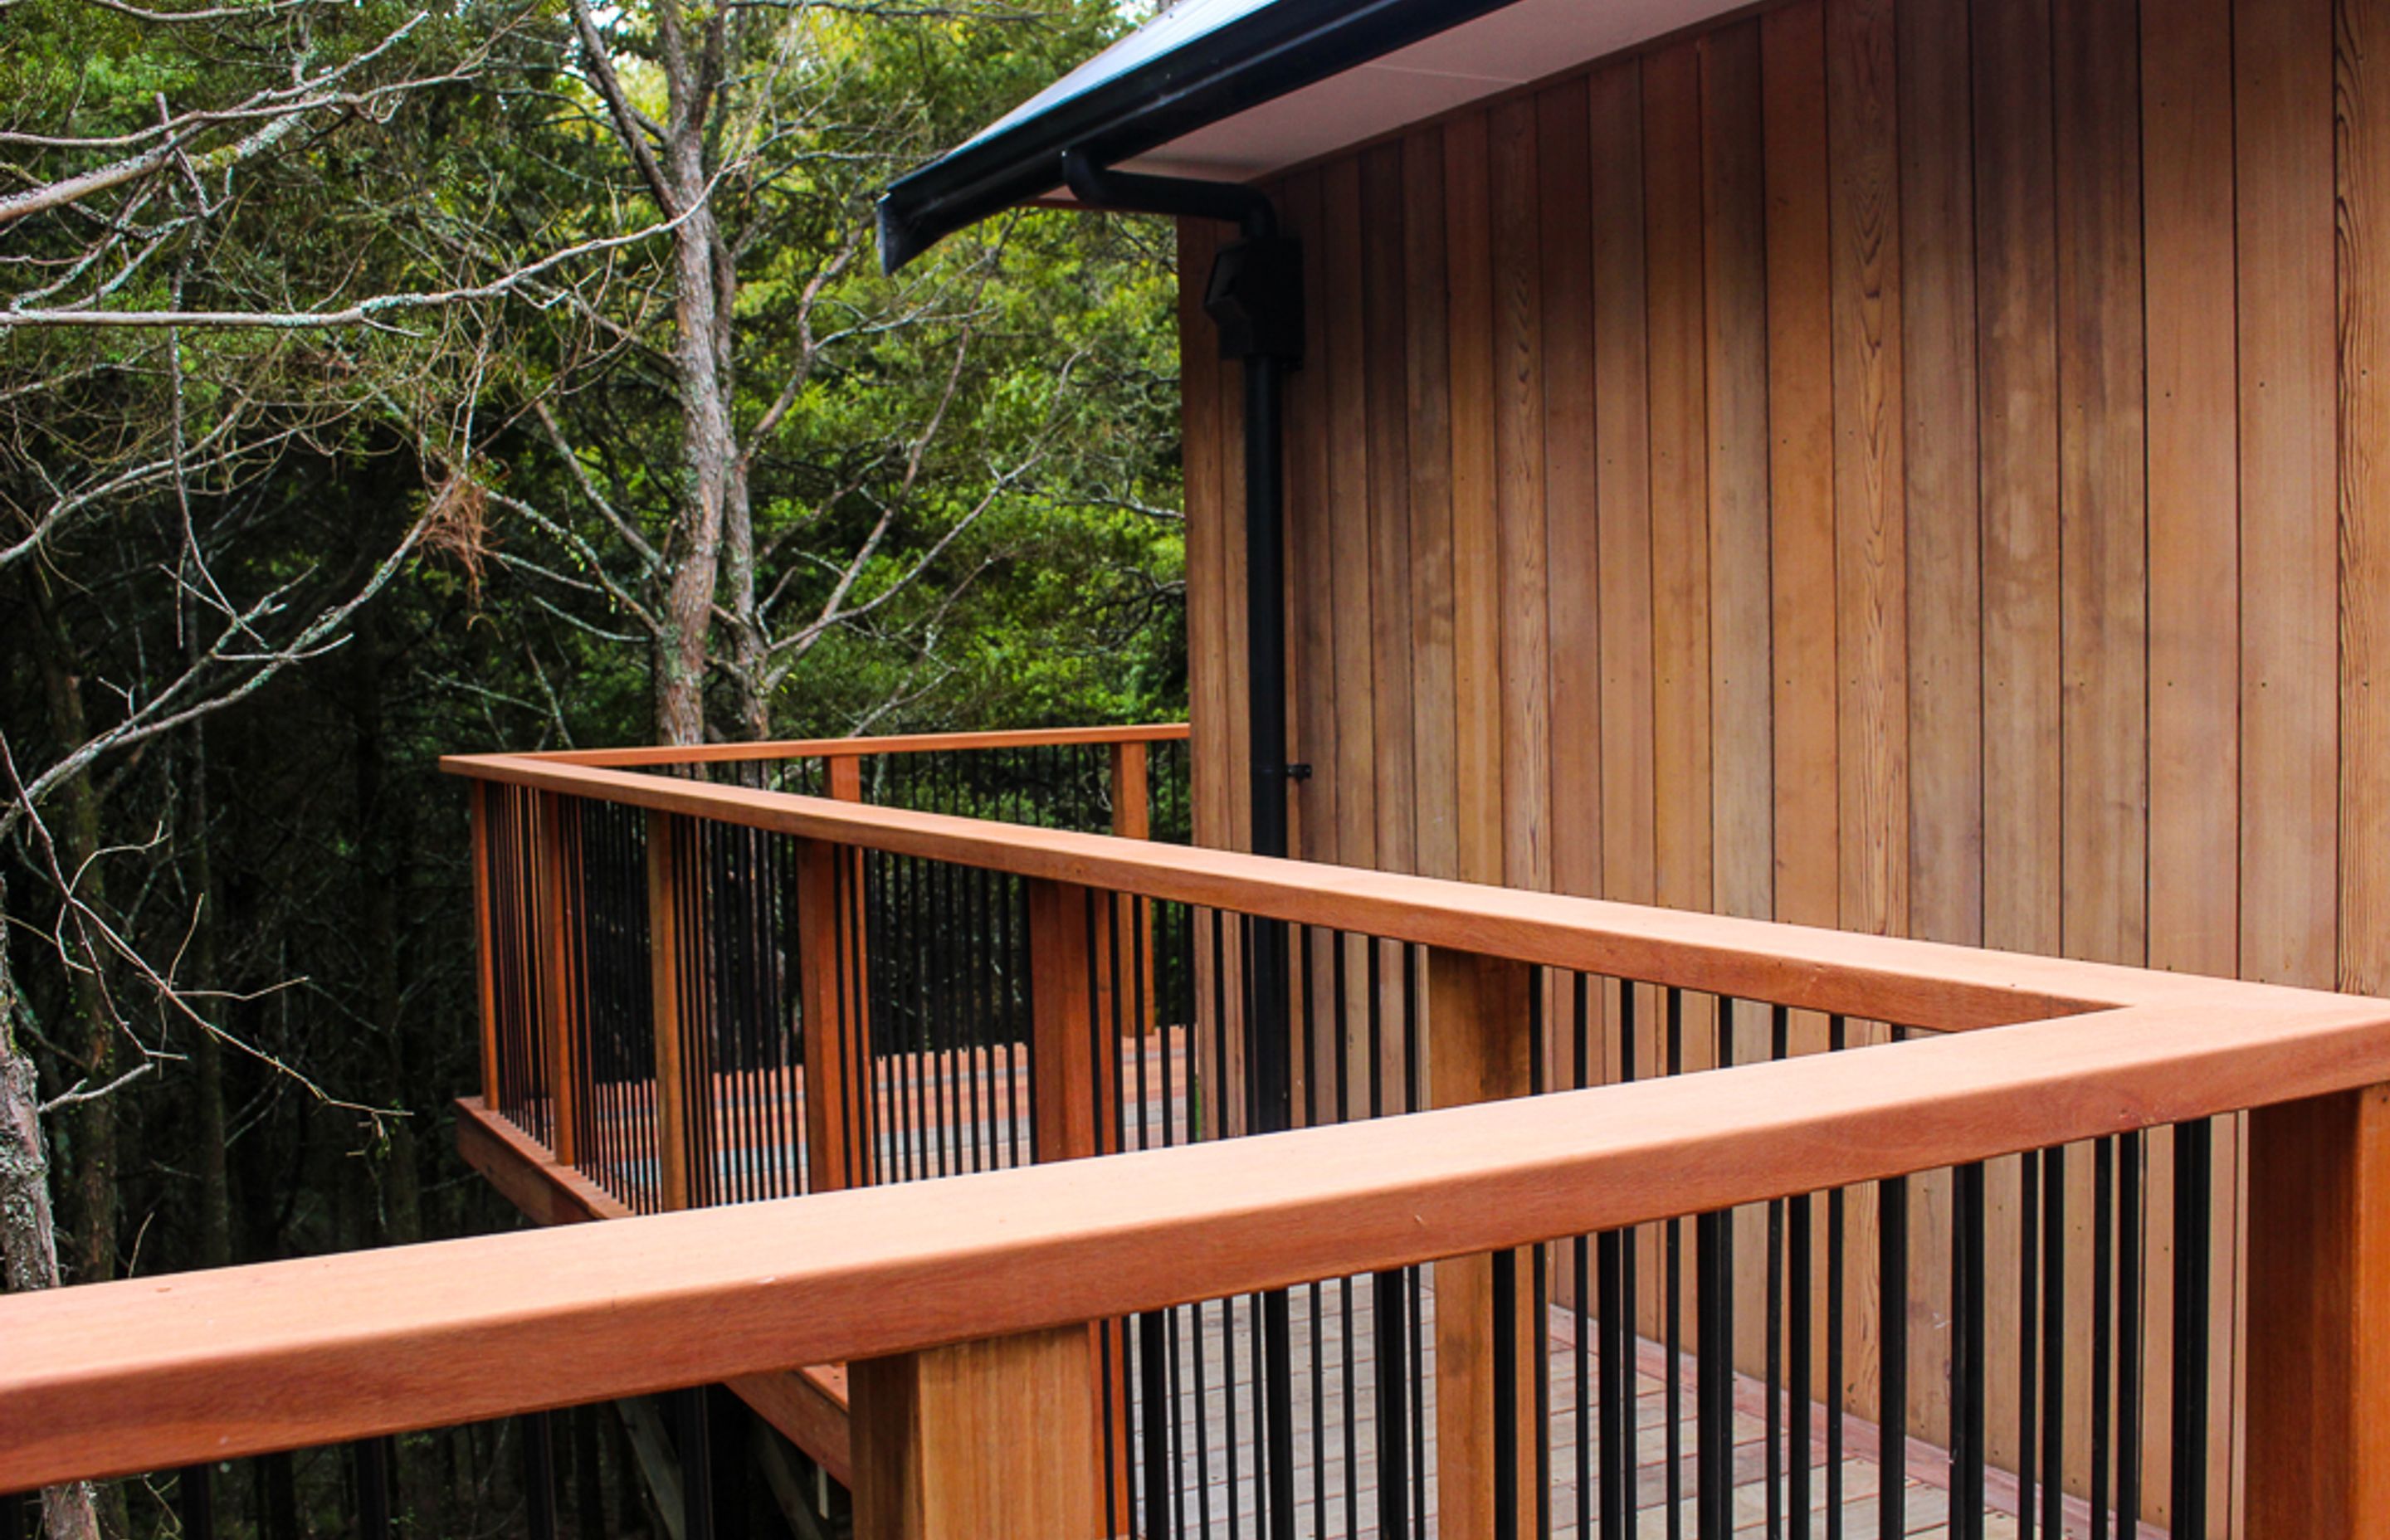 Custom built deck railing / balustrade is made from powder coated aluminum contrasted with Saligna timber - a Hardwood NZ grown Gum.